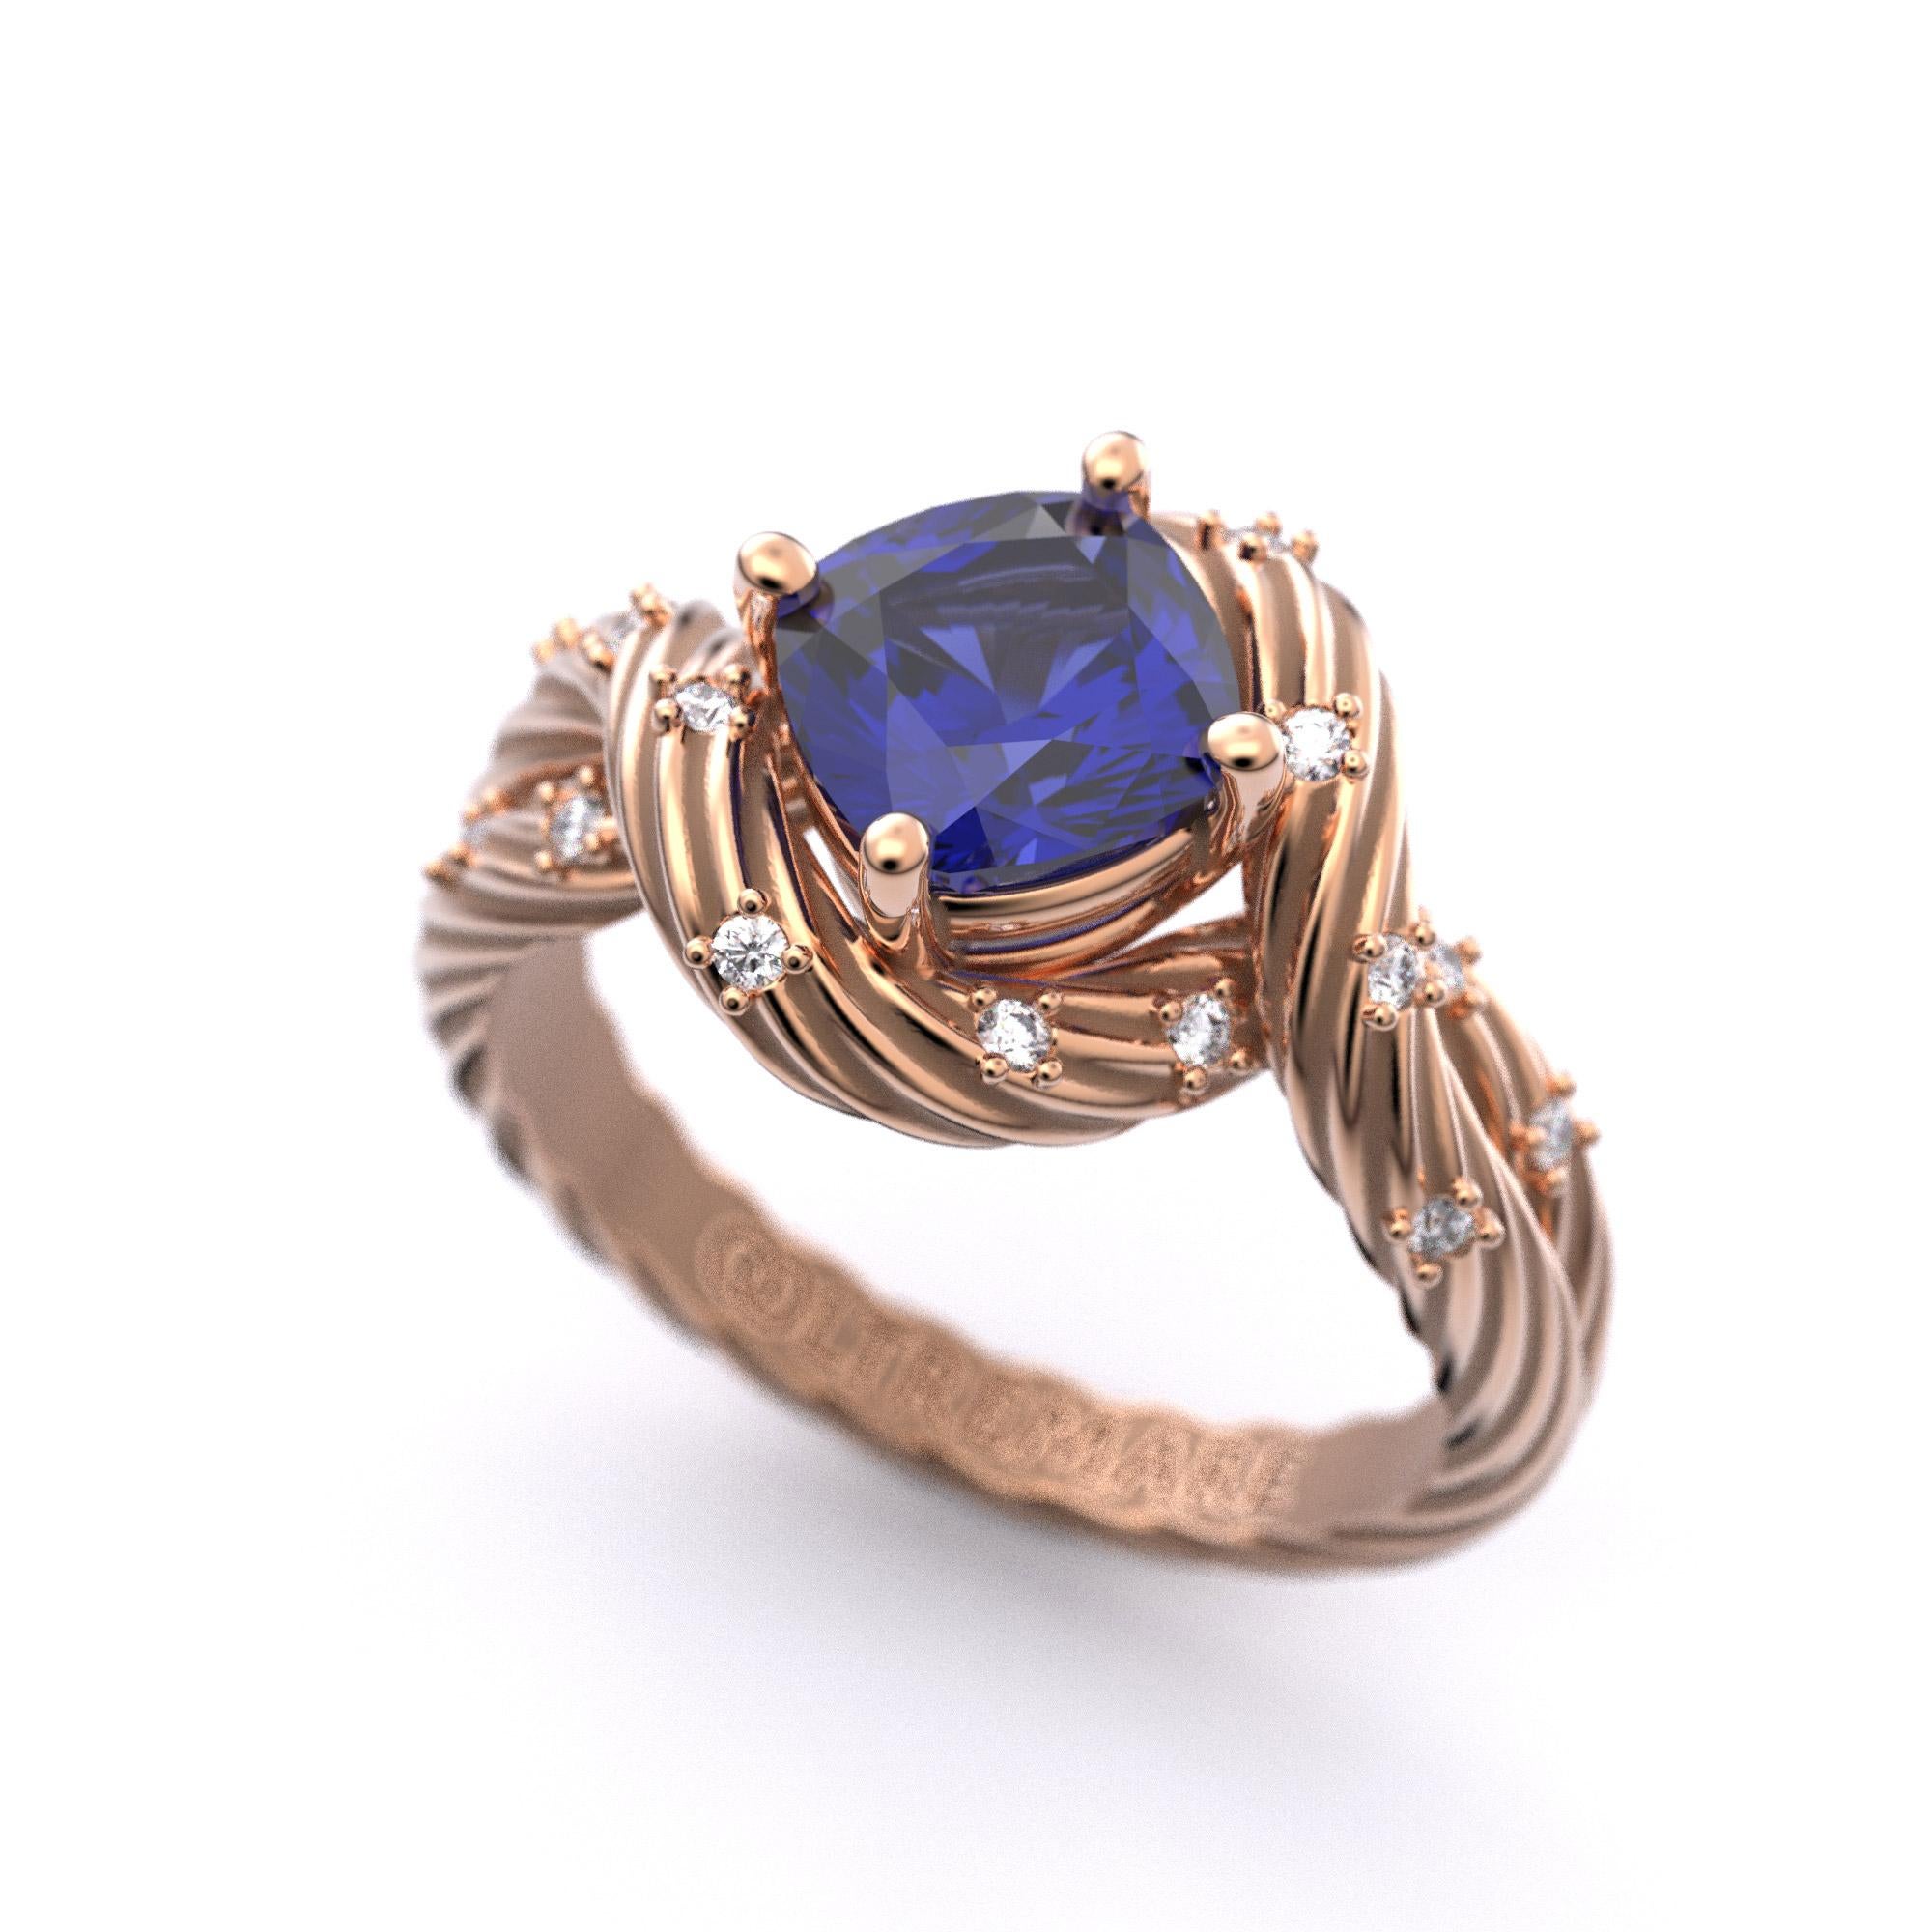 For Sale:  Tanzanite and Diamonds Ring 14k Solid Gold, Italian Fine Jewelry, made to order. 9